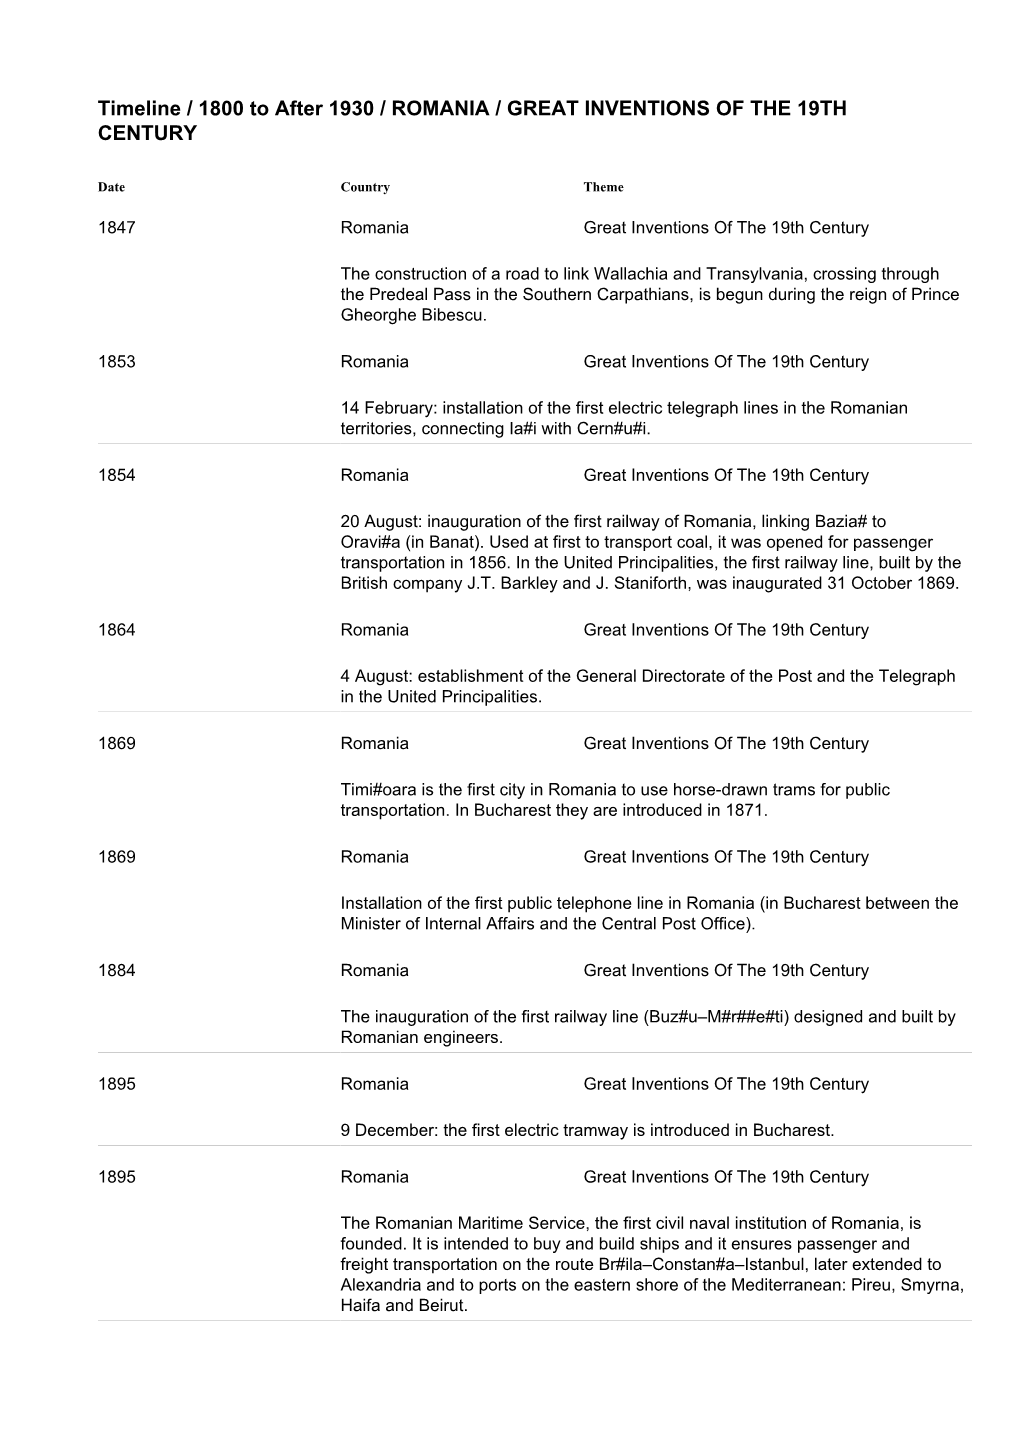 Timeline / 1800 to After 1930 / ROMANIA / GREAT INVENTIONS of the 19TH CENTURY